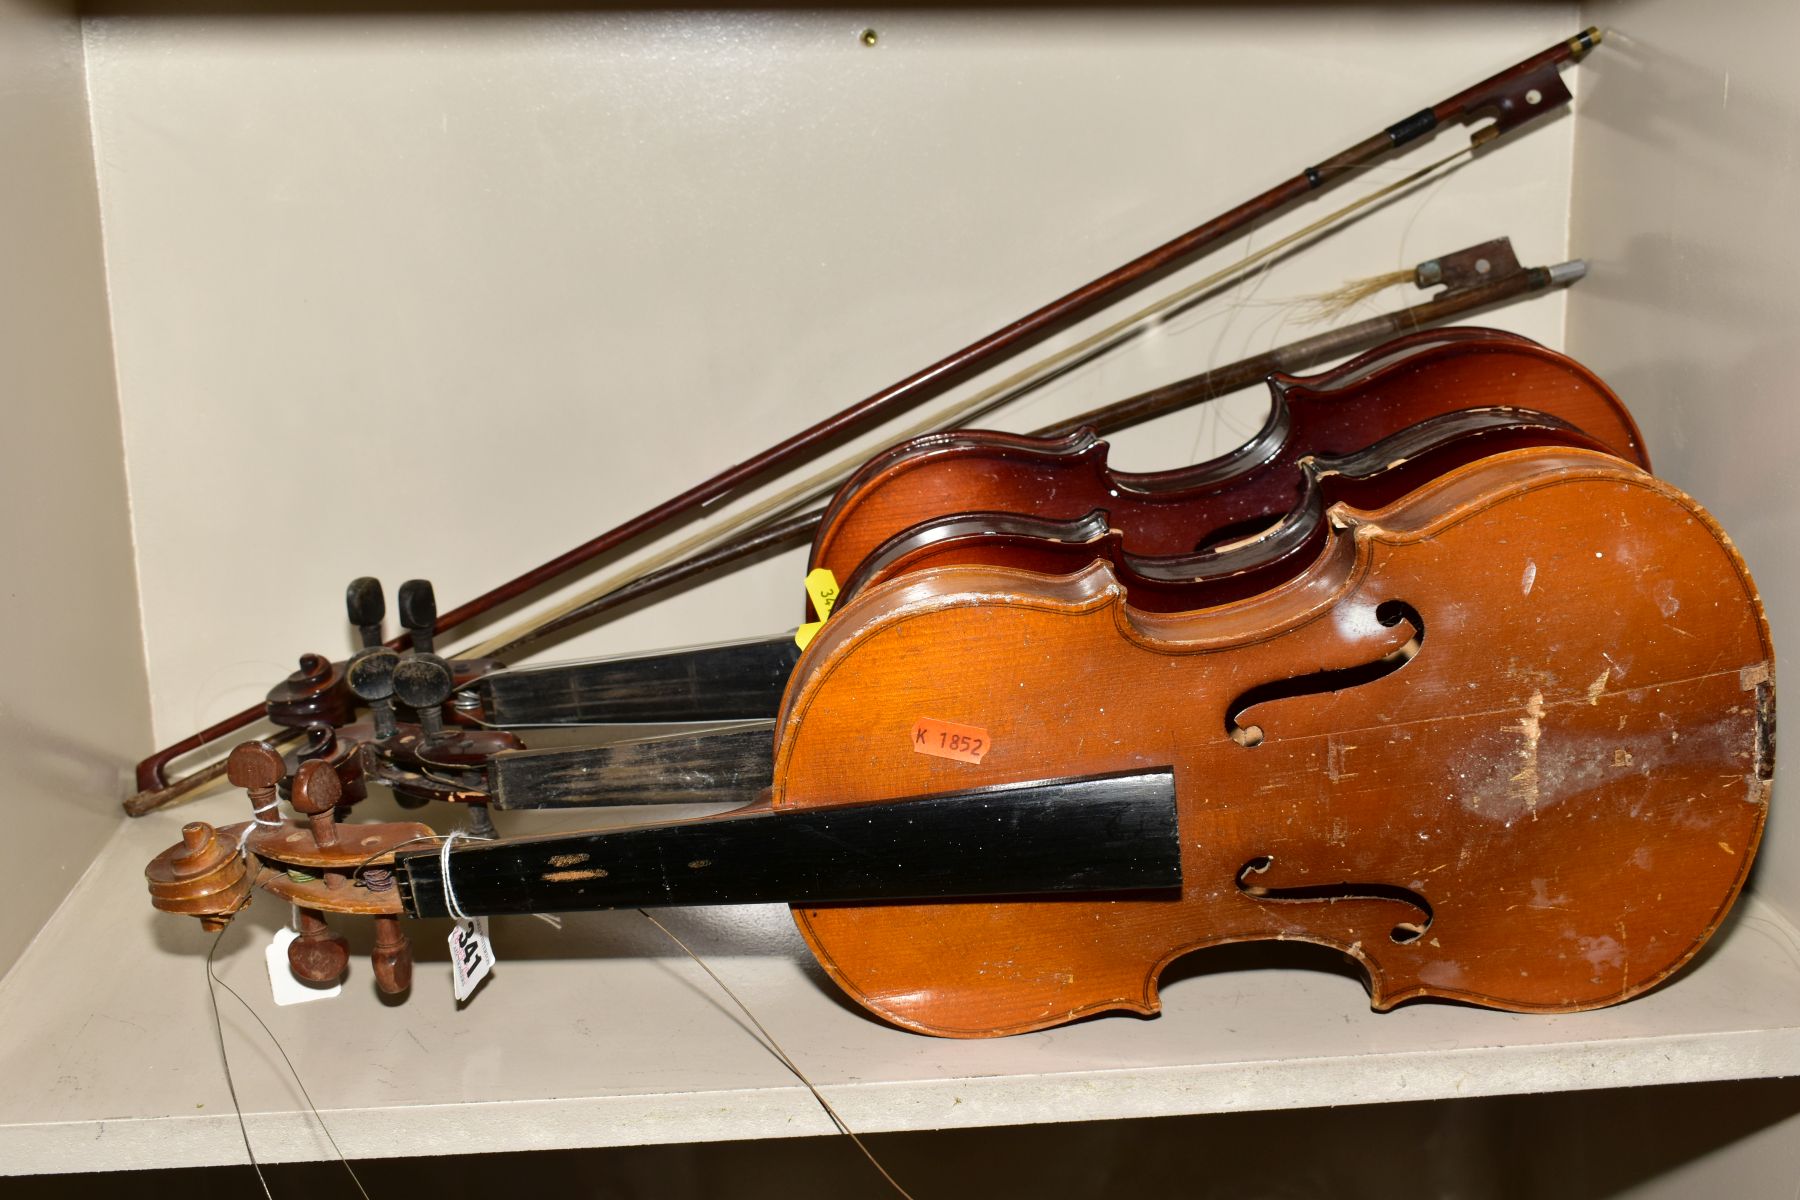 TWO TATRA VIOLINS by Rosetti, with a Chinese 'Lark' violin, all in need of some restoration, with